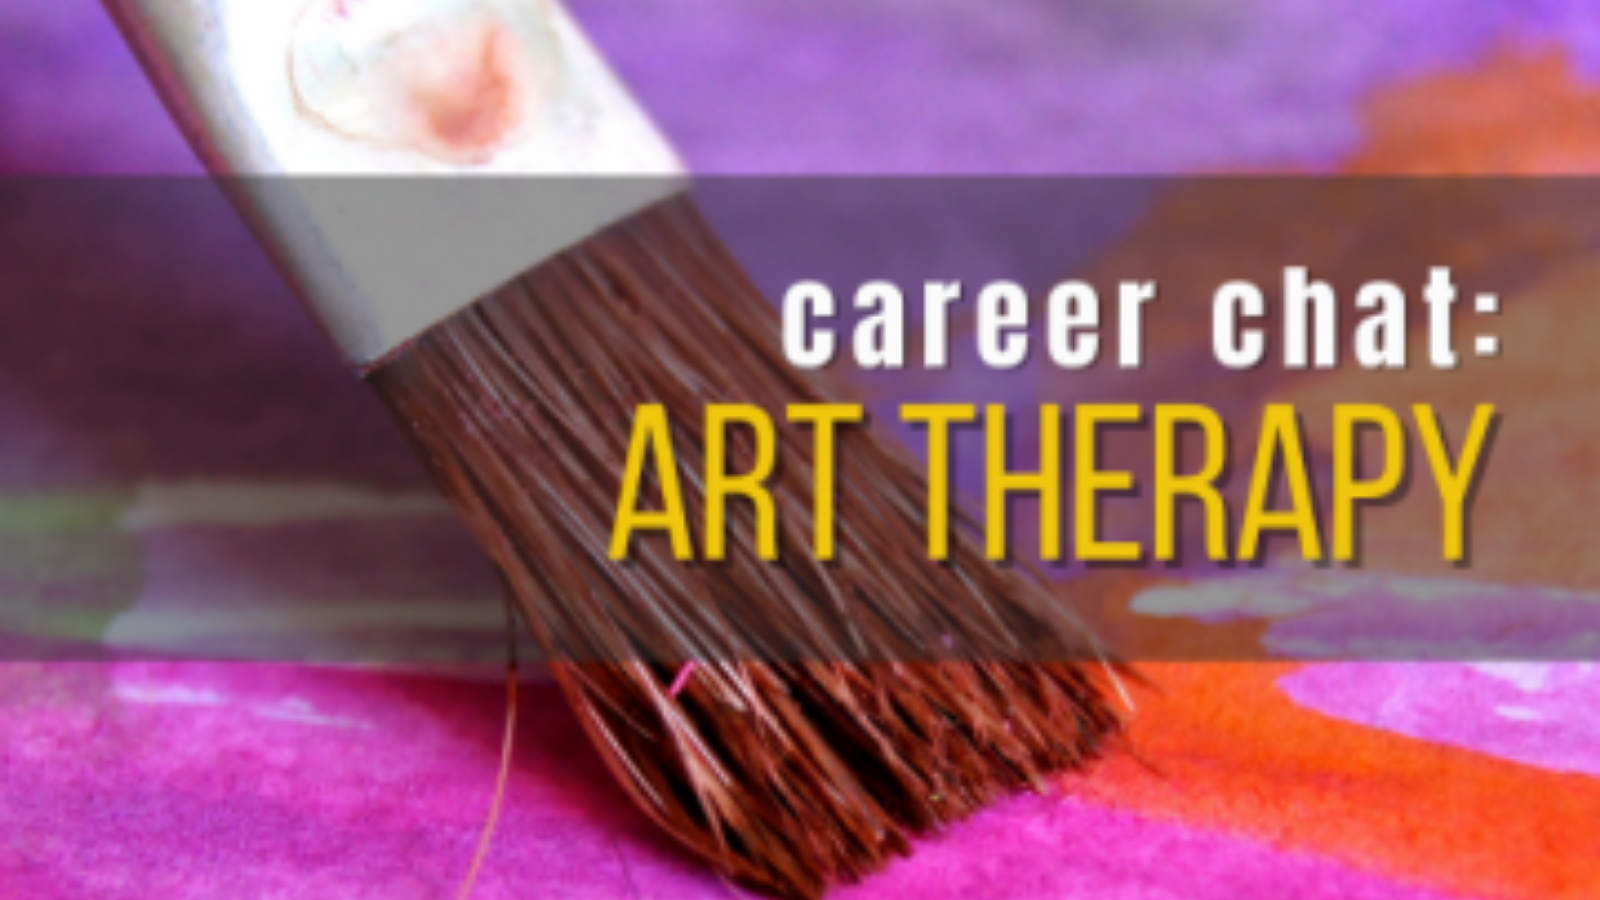 SP22 Career chat arts therapy inset